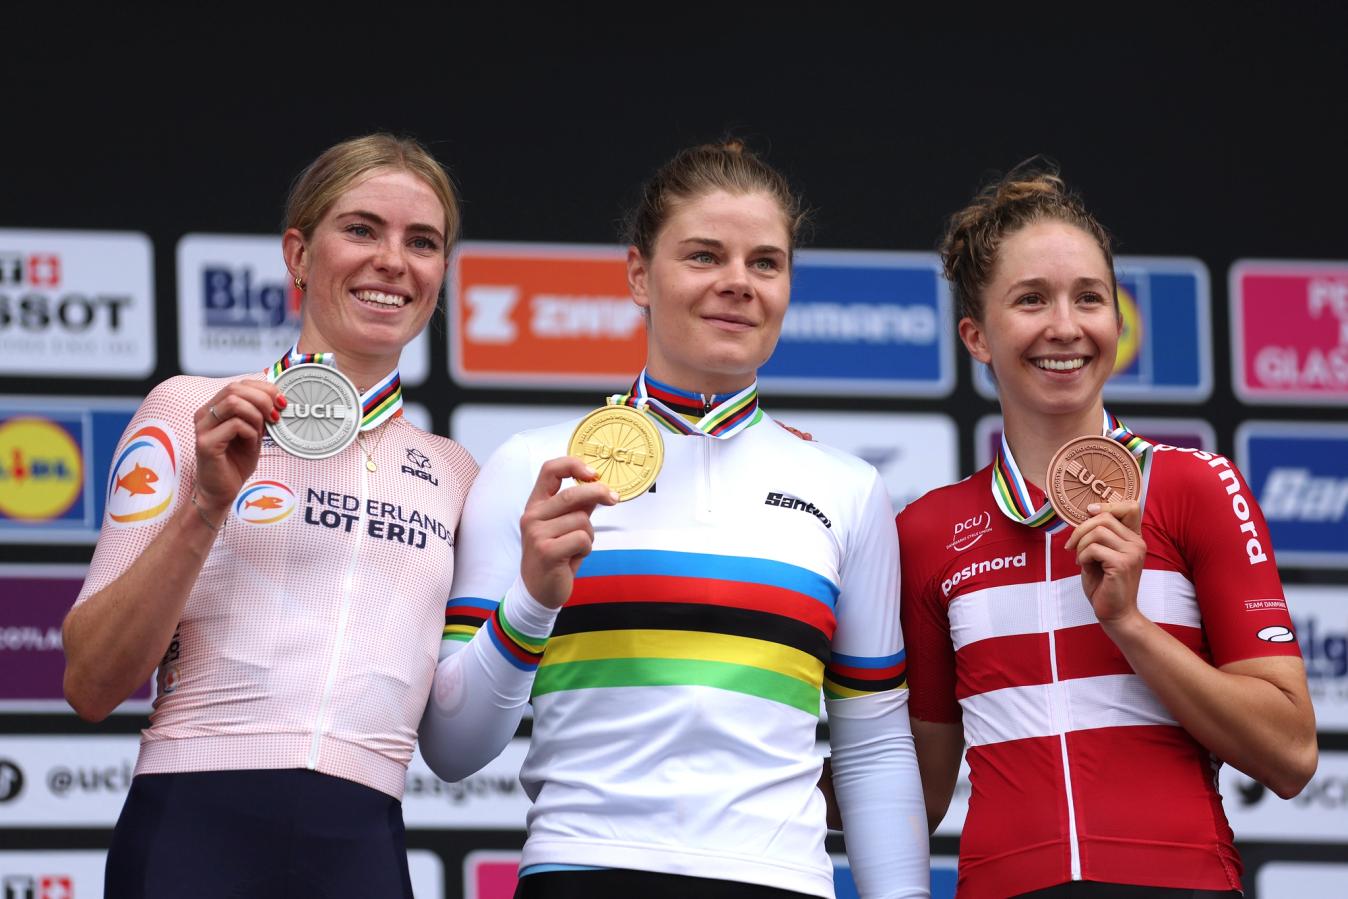 Lotte Kopecky won the women's road race at the Glasgow World Championships